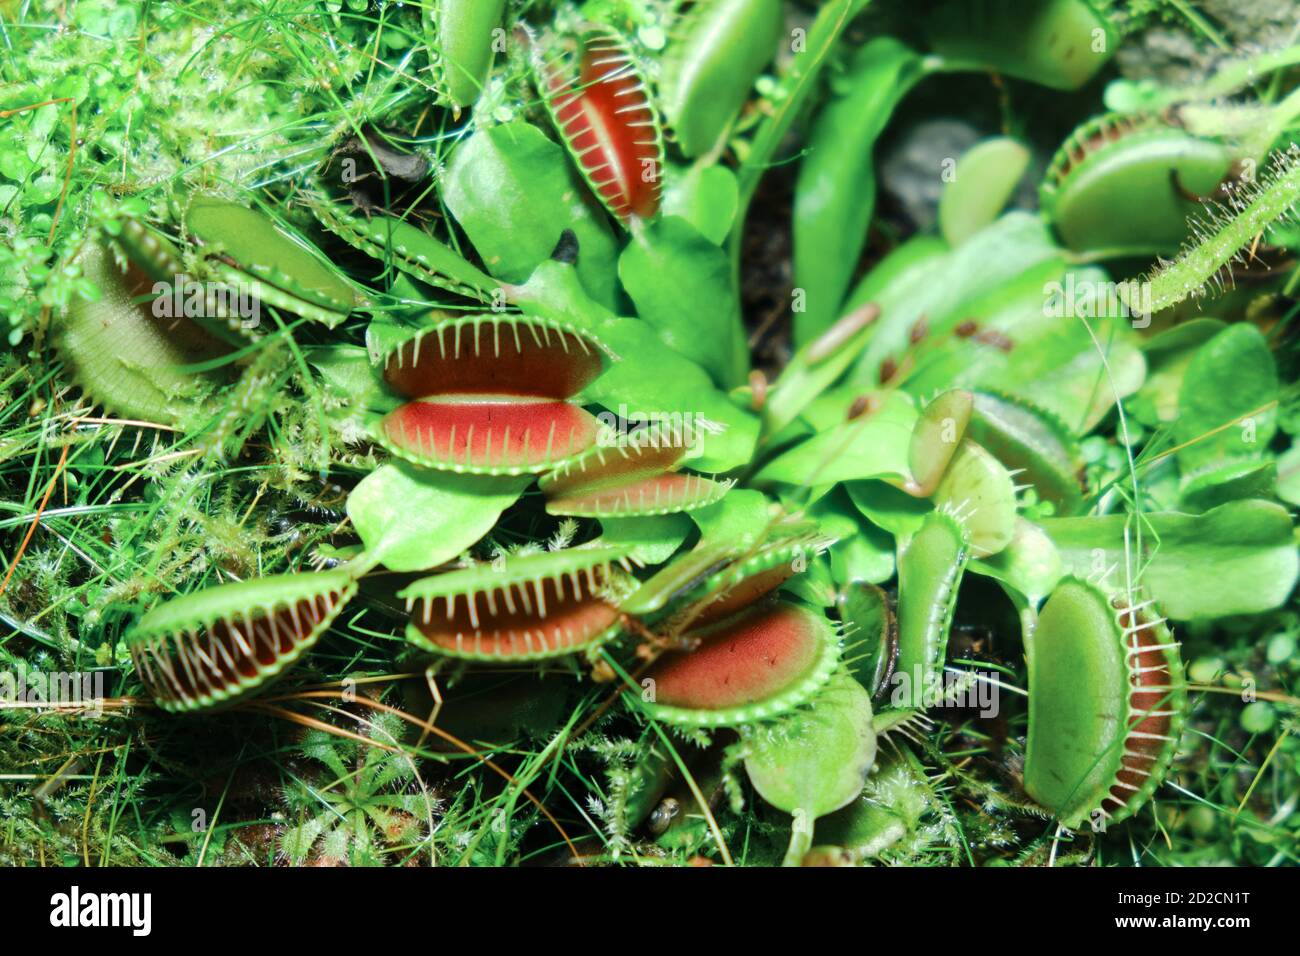 The Venus flytrap (Dionaea muscipula) is a carnivorous plant native to subtropical wetlands on the East Coast of the United States in North Carolina a Stock Photo